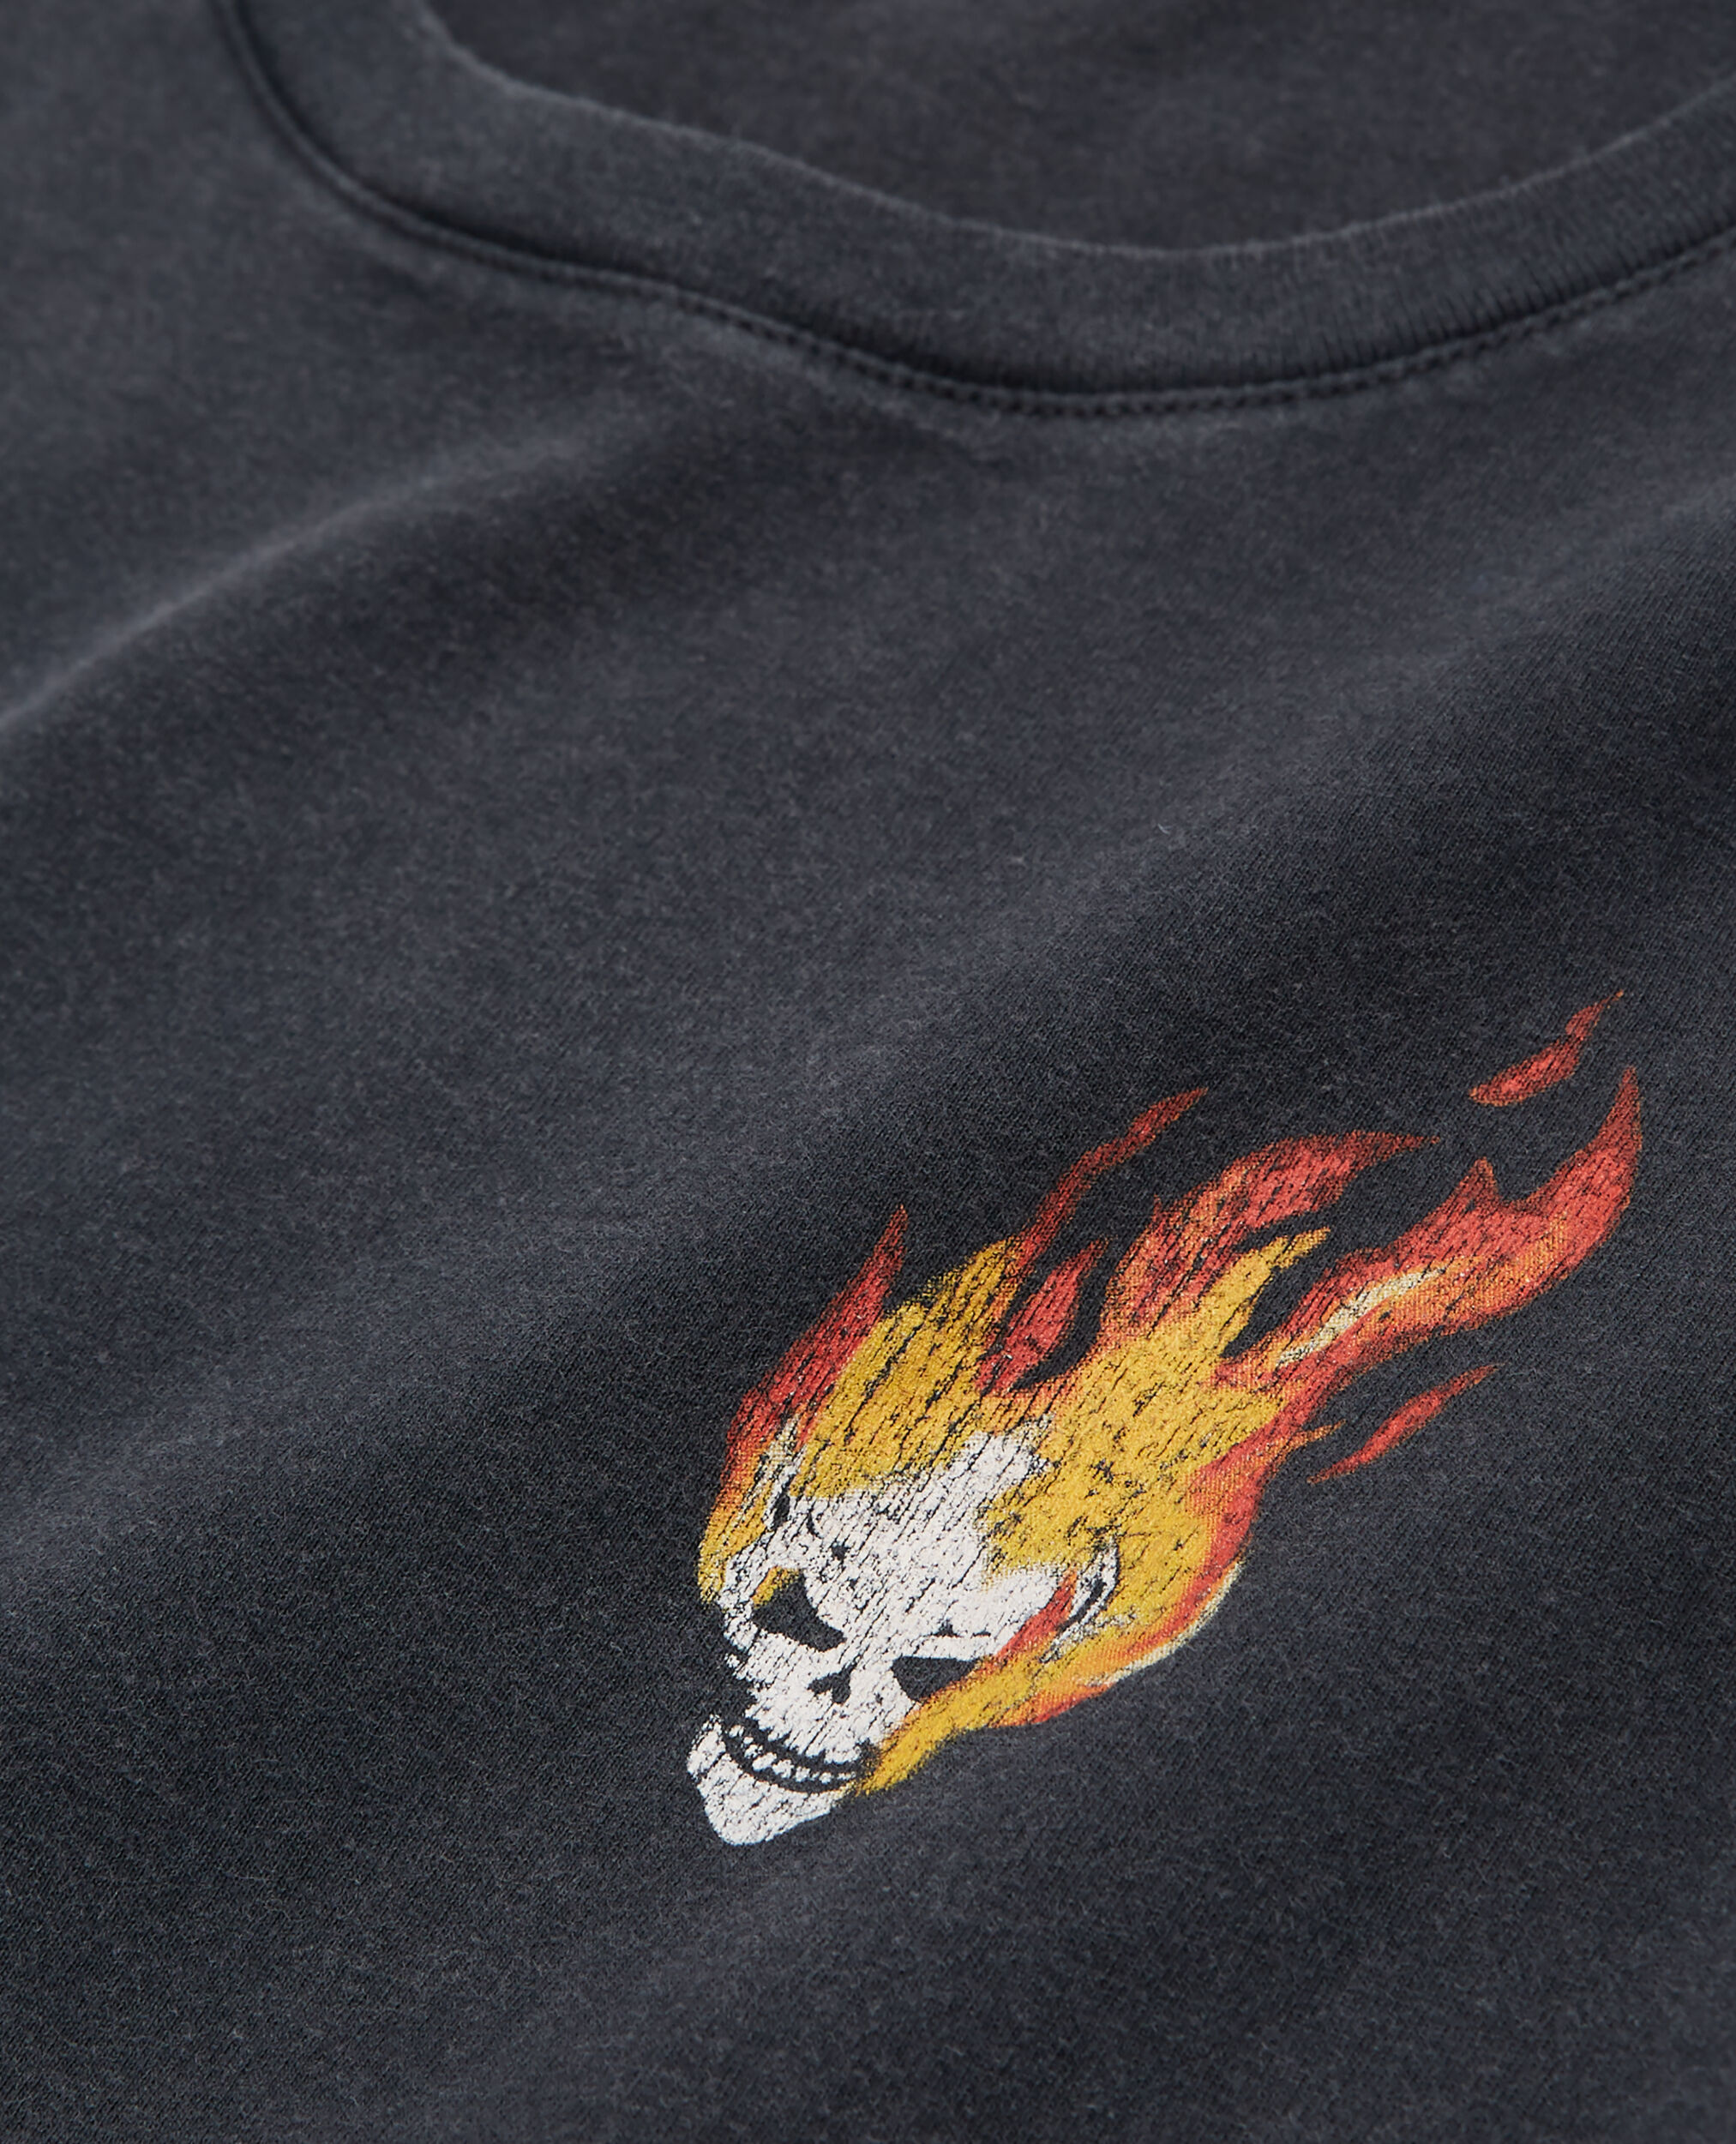 Women's black t-shirt with skull on fire print, BLACK WASHED, hi-res image number null